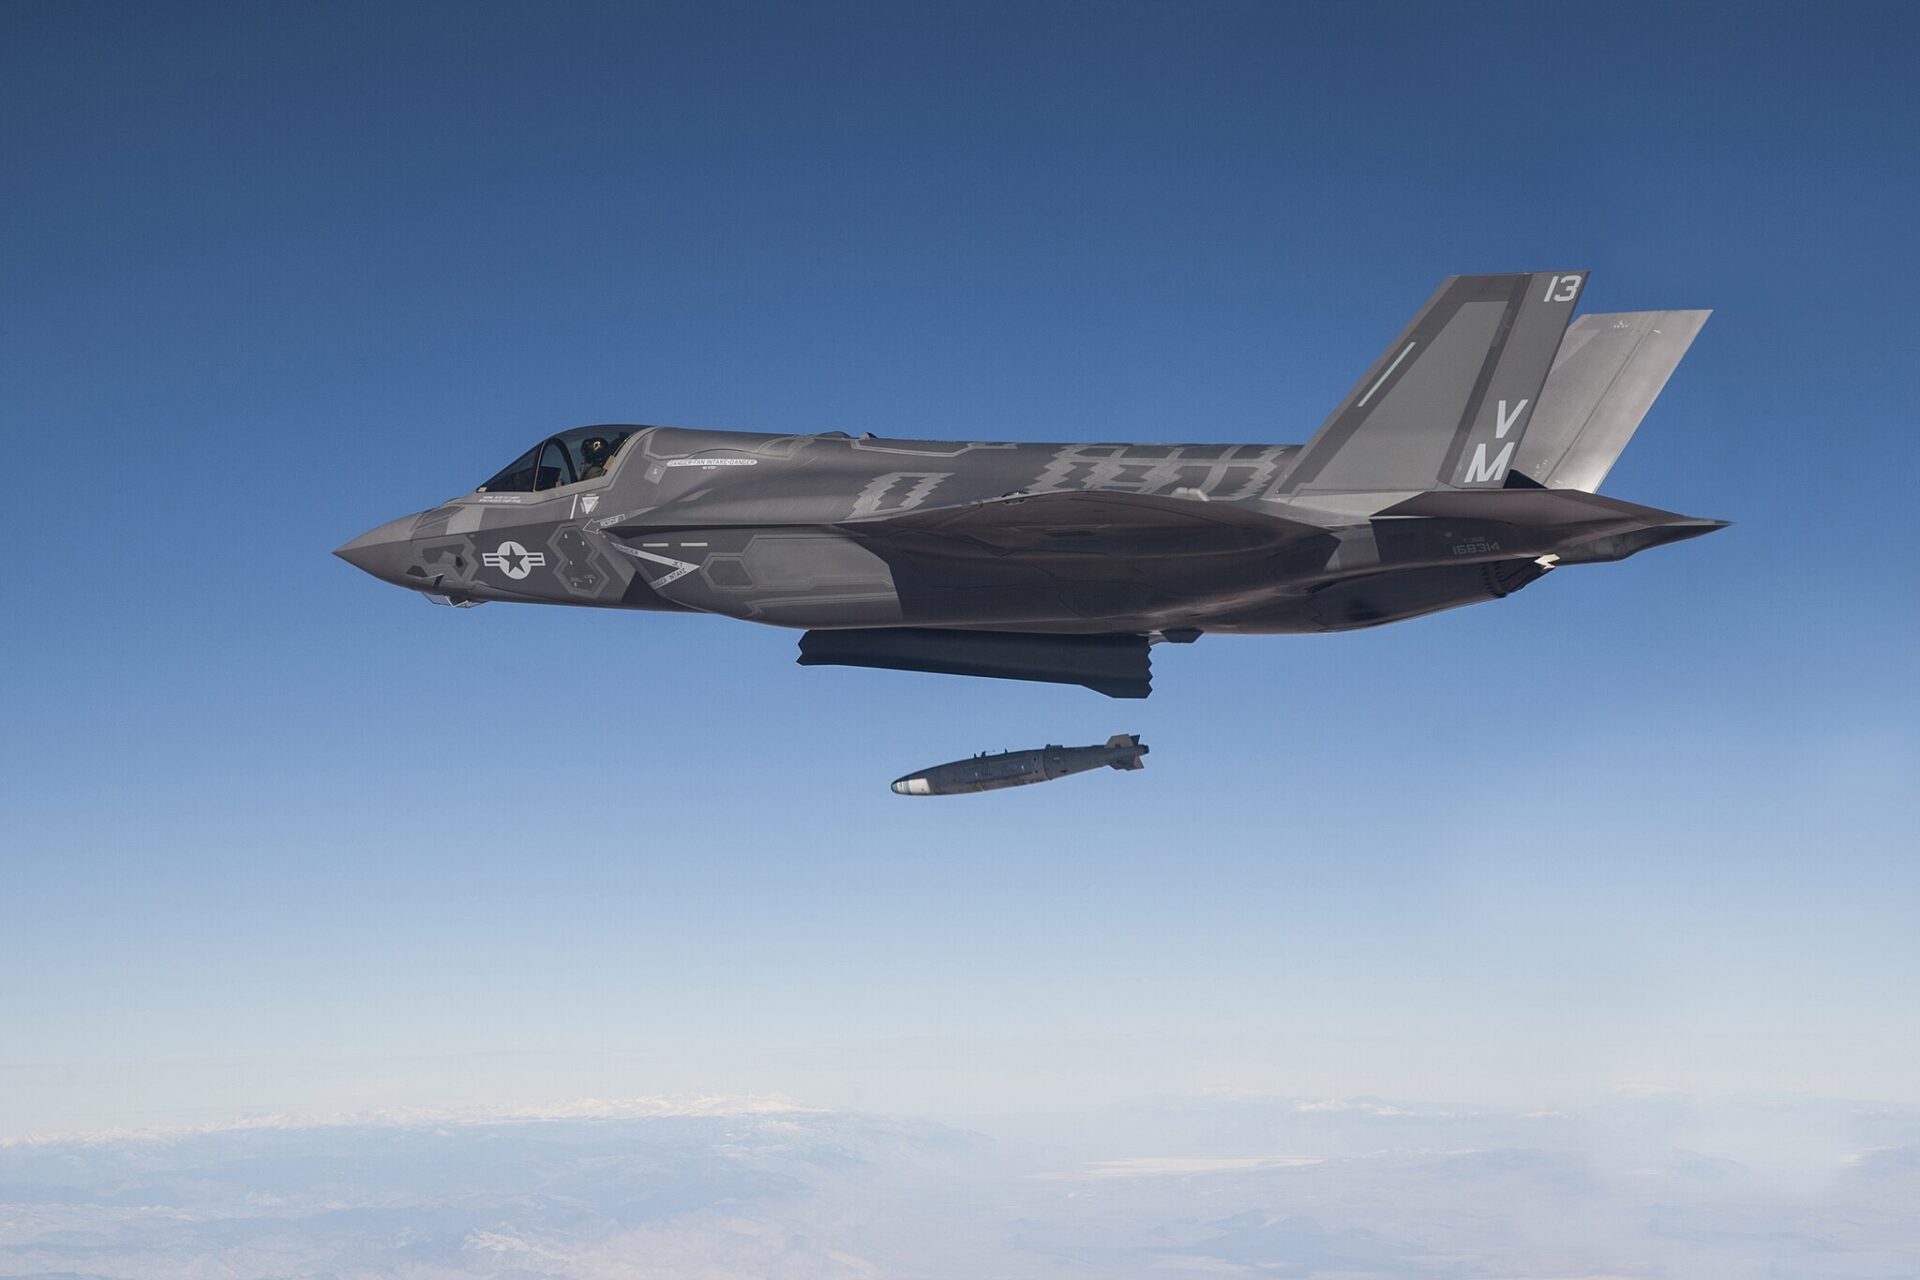 An F-35B Joint Strike Fighter test aircraft piloted by Marine Corps Lt. Col. Jon "Miles" Ohman drops a GBU-32 guided munition during a live-fire weapons delivery test at Edwards Air Force Base, California (Tom Reynolds, U.S. Navy photo courtesy of Lockheed Martin)